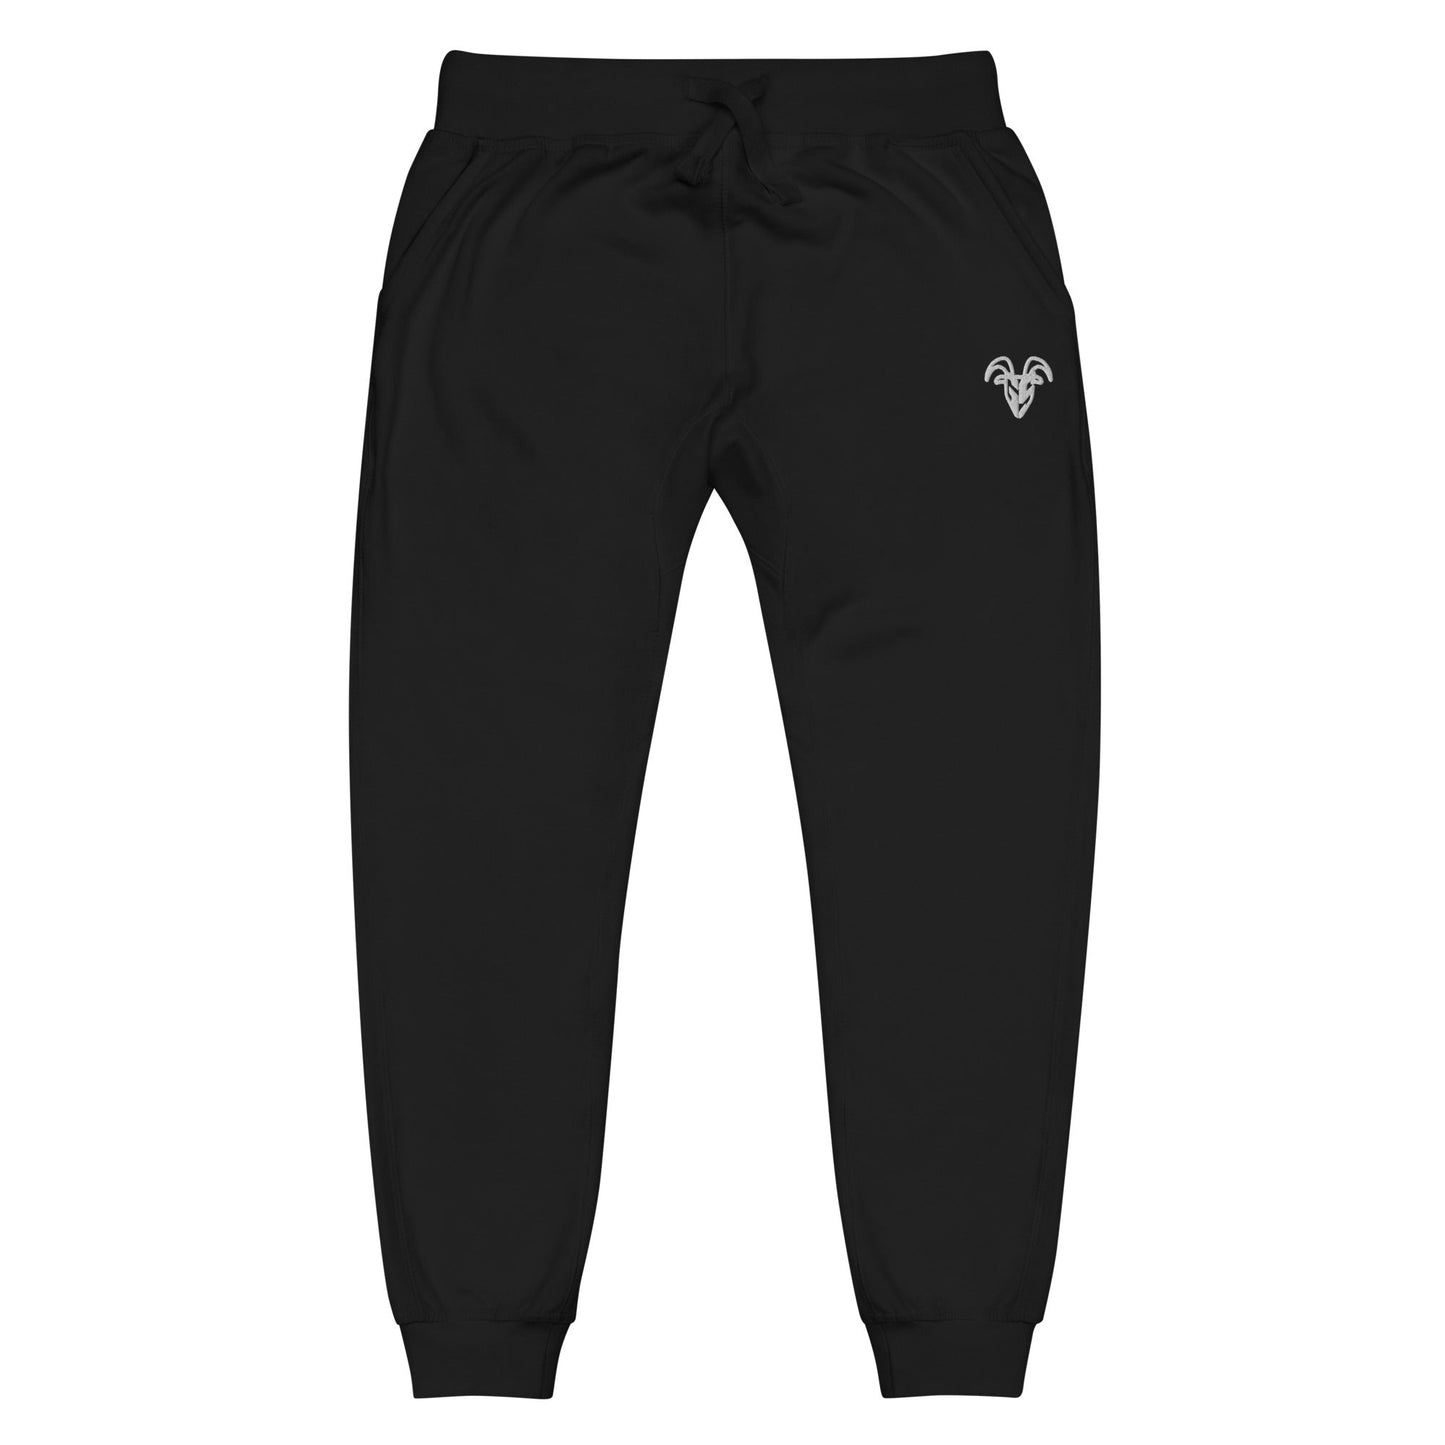 Embroidered Goat Gym Joggers – The GOAT Strength